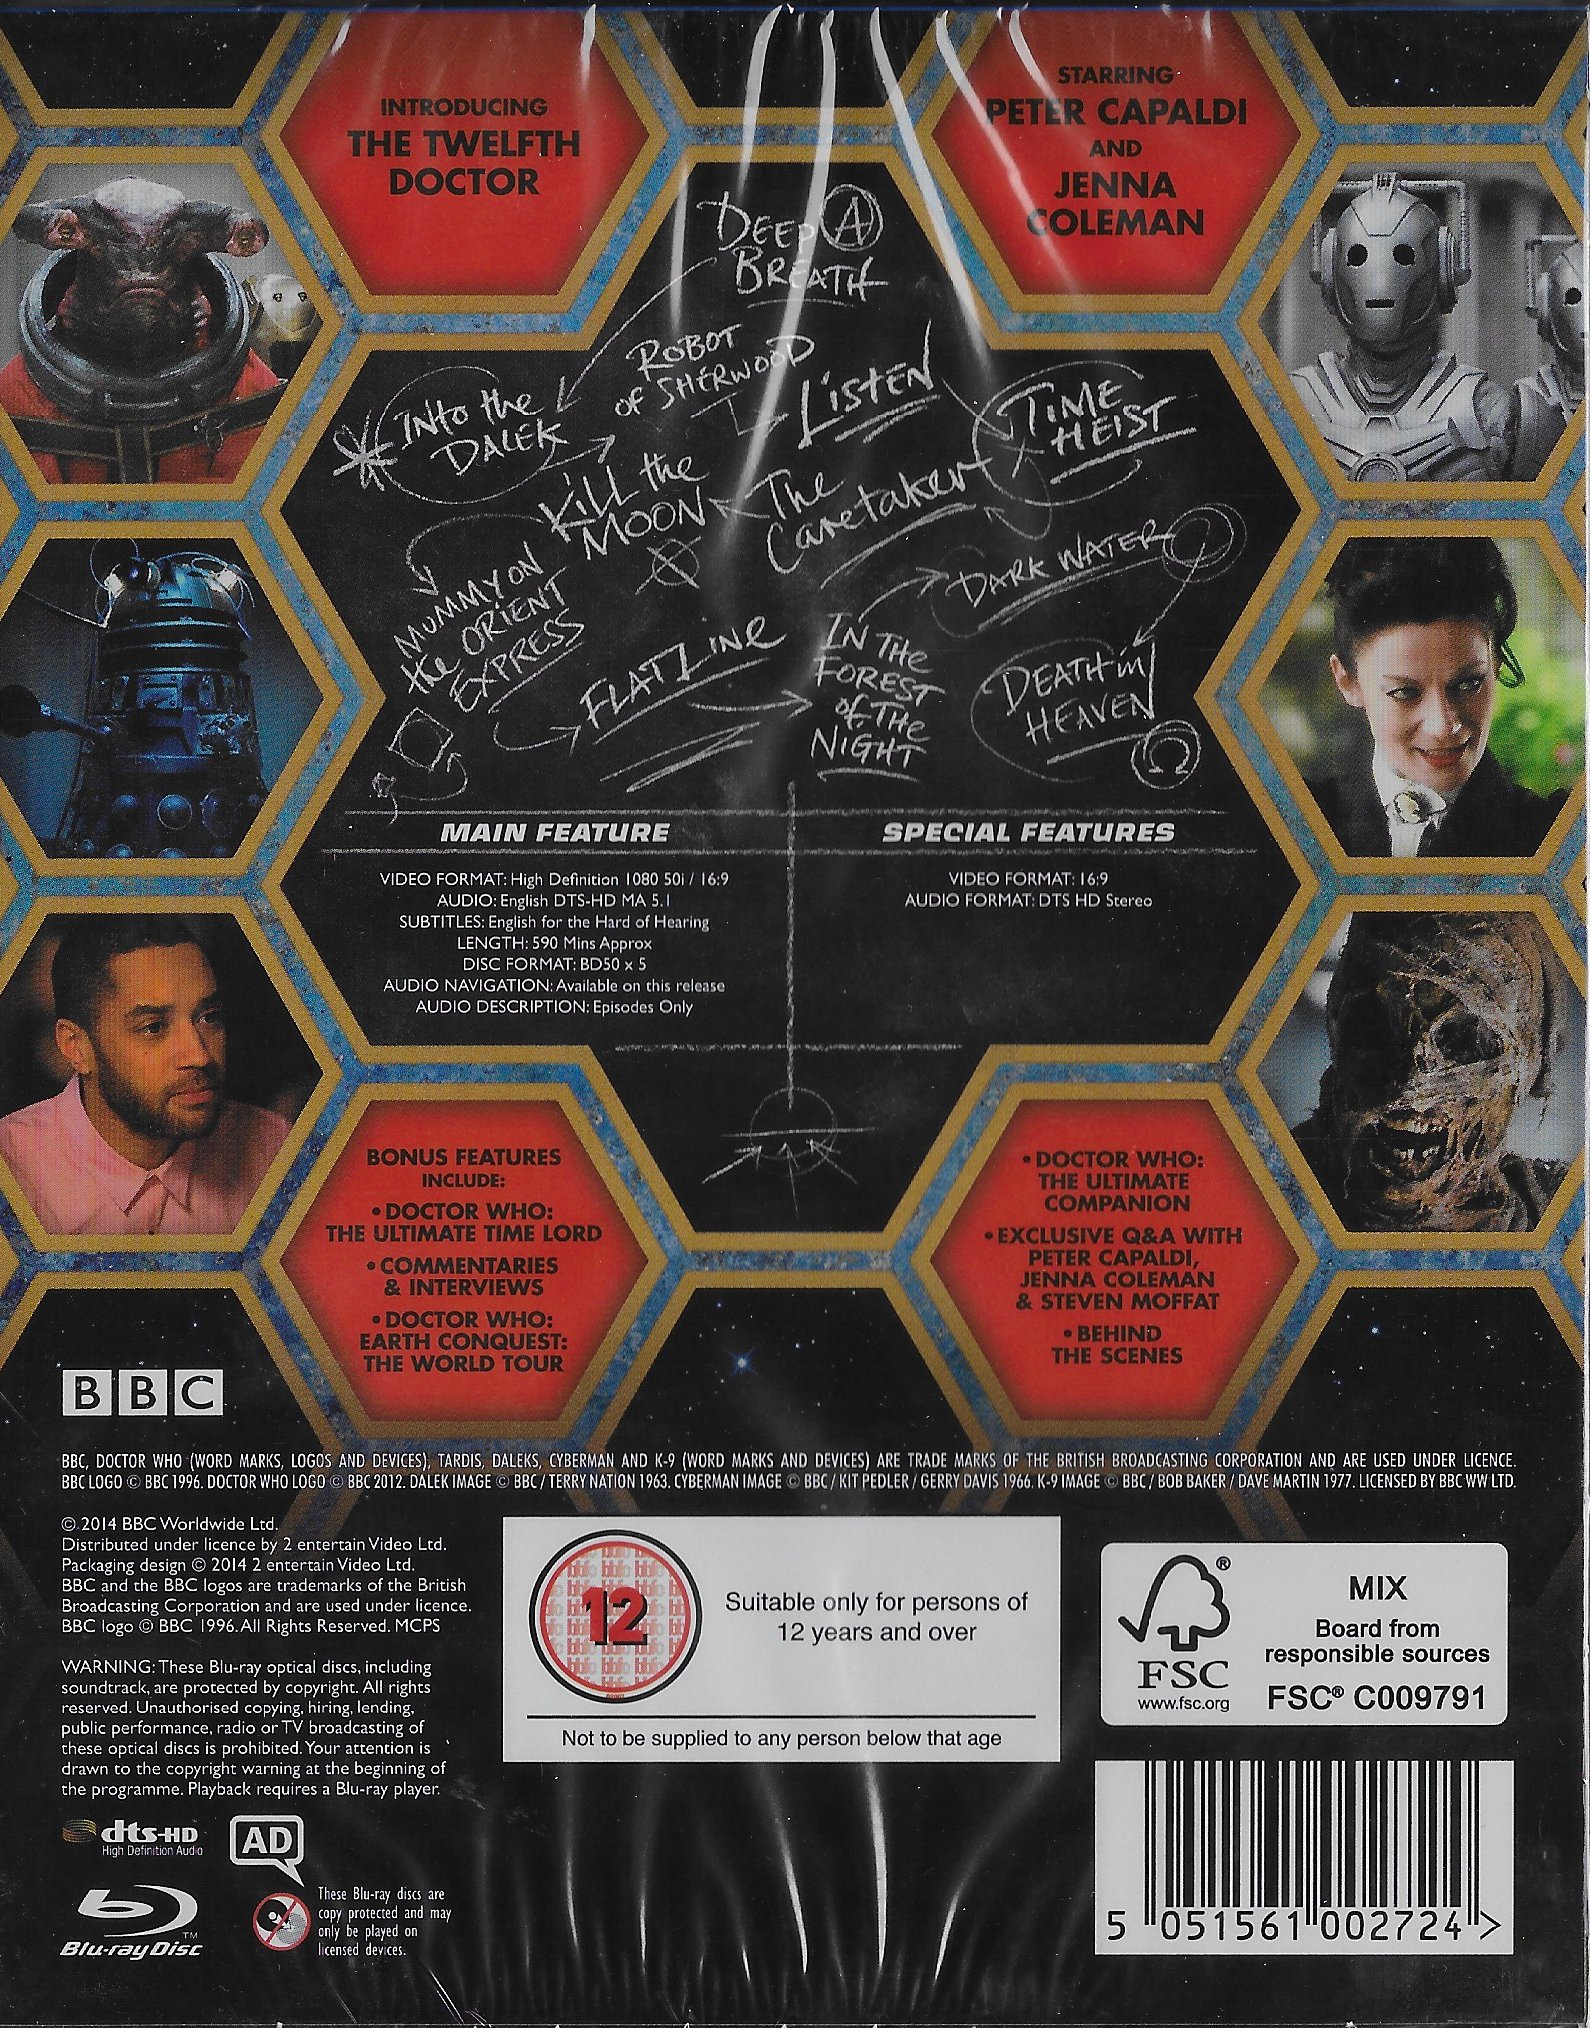 Picture of BBCBD 0272 Doctor Who - The complete series 8 by artist Various from the BBC records and Tapes library